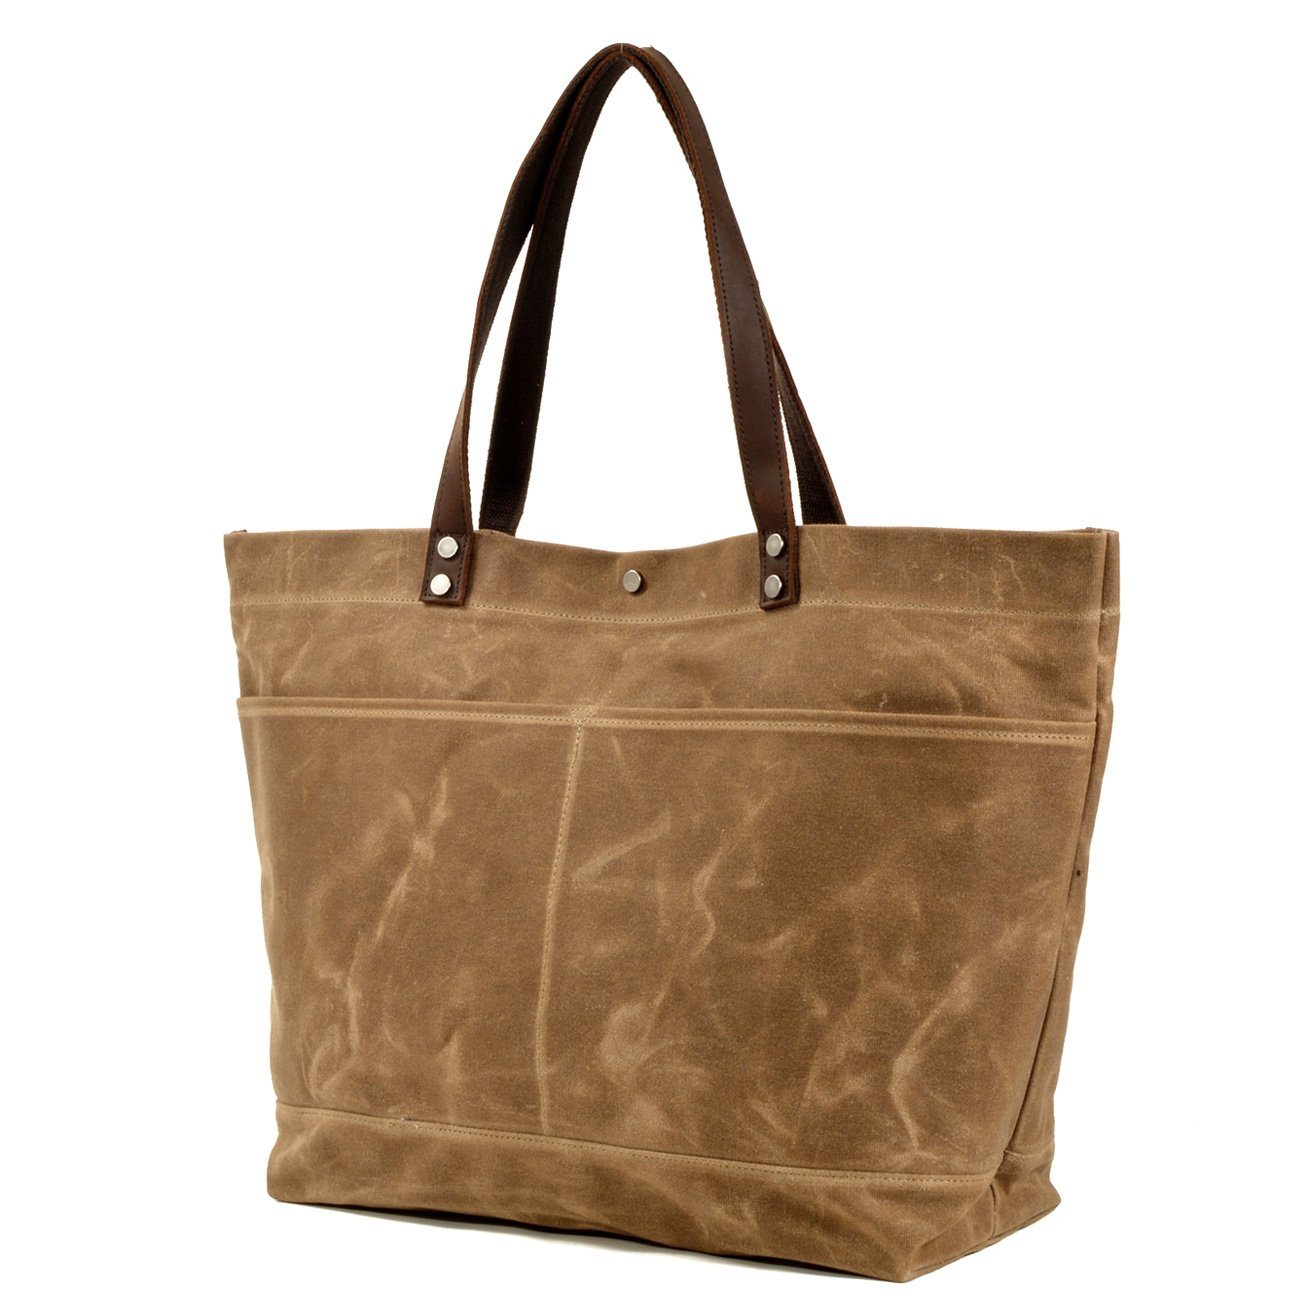  Lands' End Waxed Canvas Tote Bag Brown Regular No Sz :  Clothing, Shoes & Jewelry